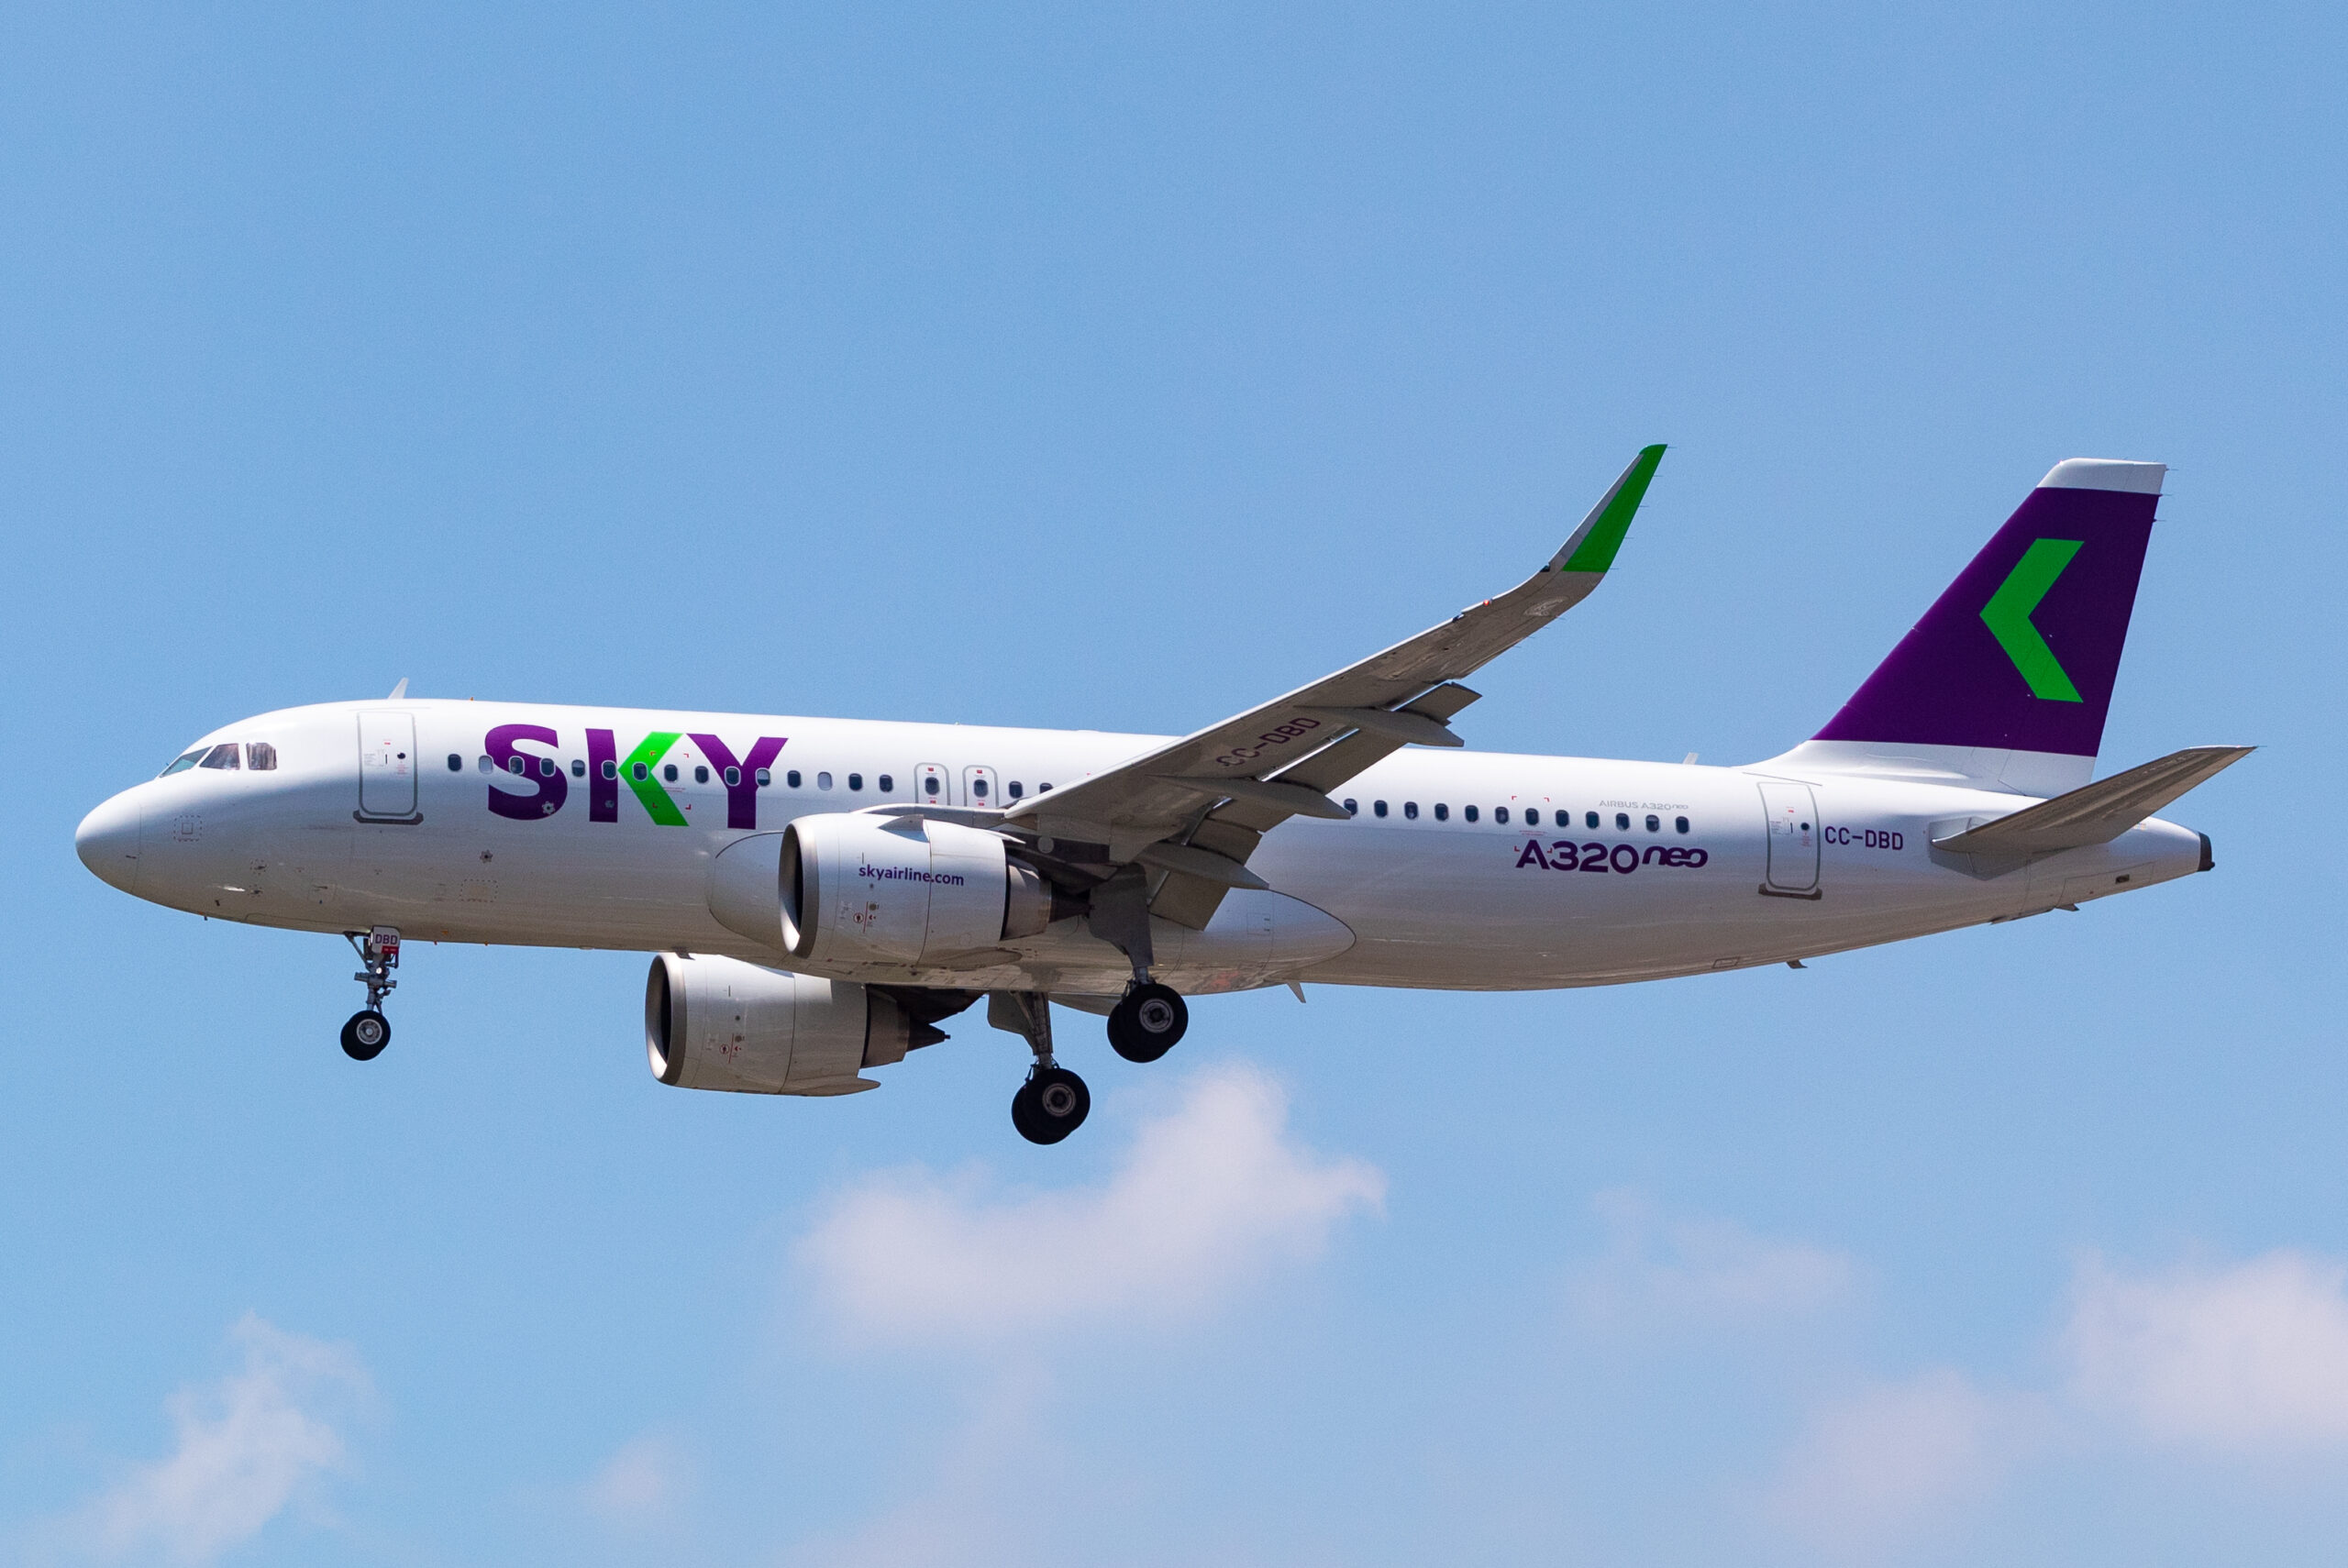 CC-DBD - Airbus A320 NEO - Sky Airlines - Blog do Spotter